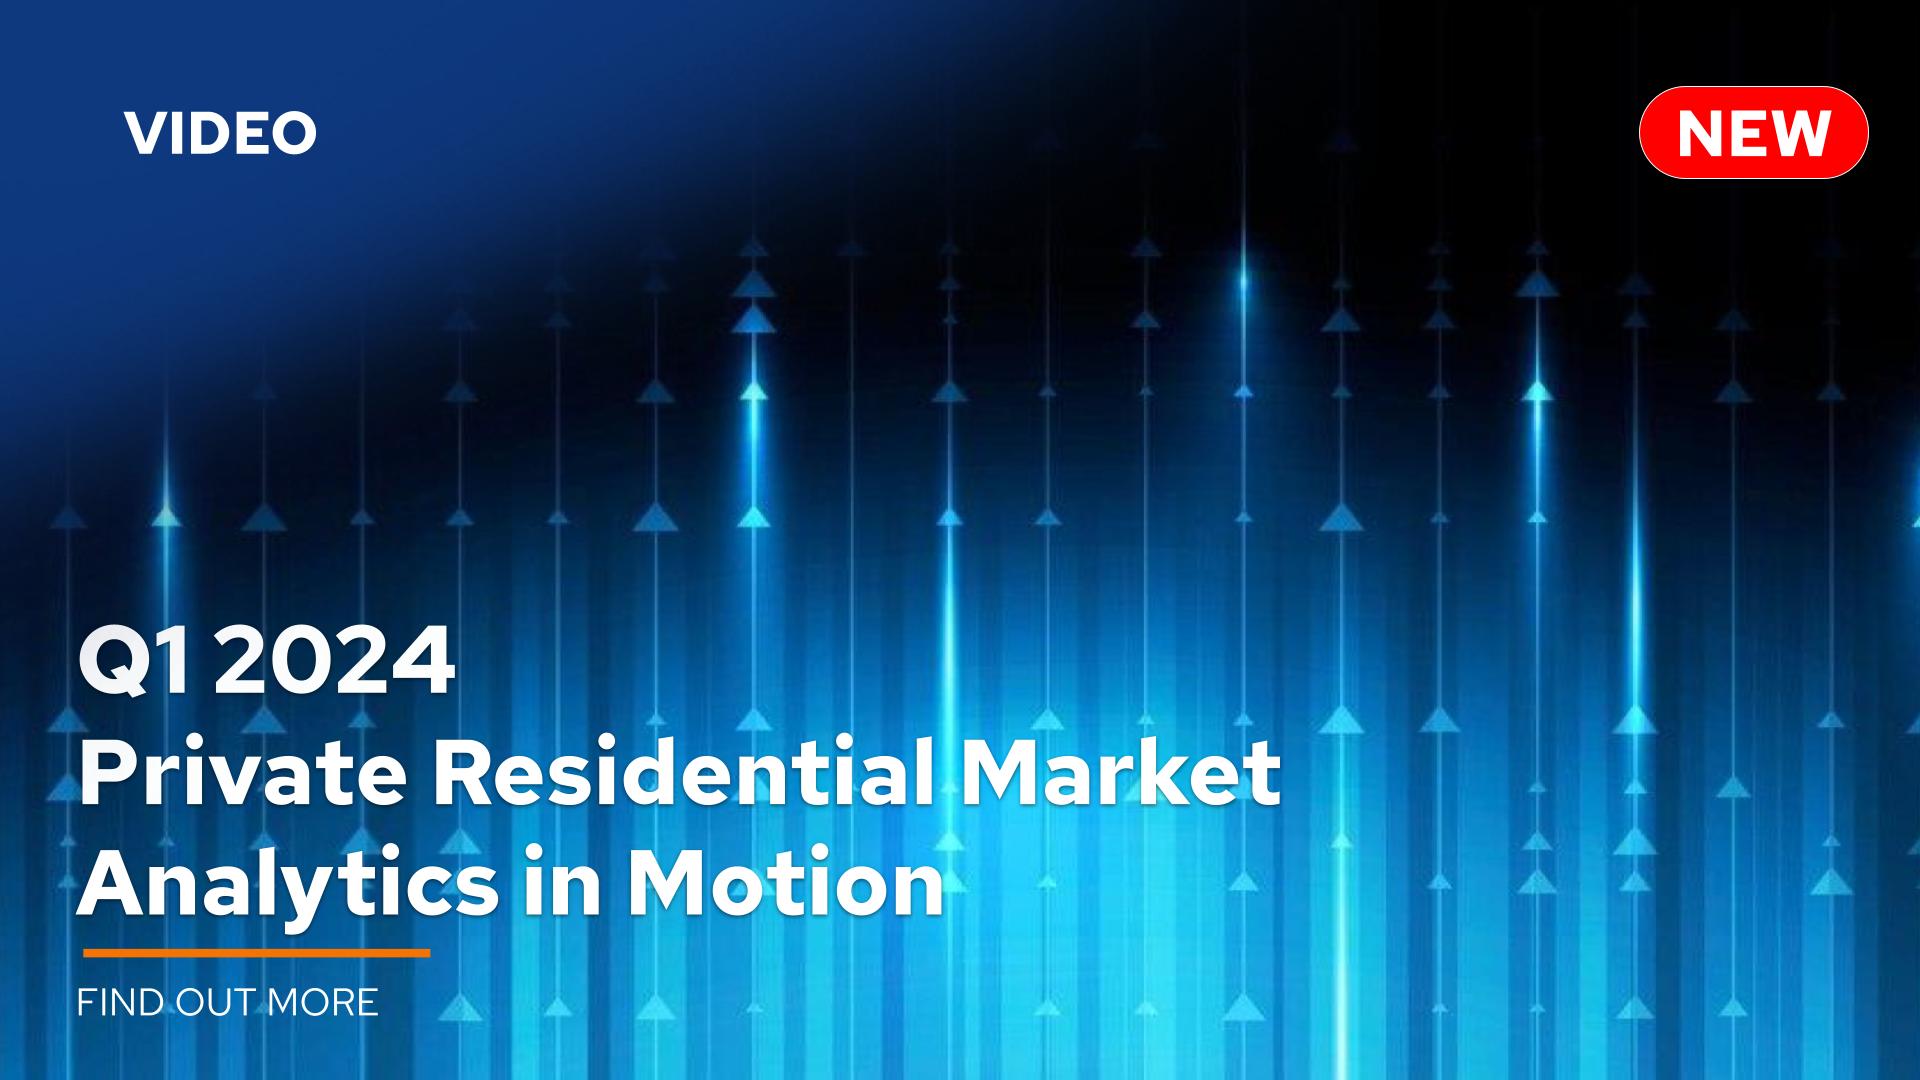 Analytics in Motion for Private Residential Trends Q1 2024 (English)